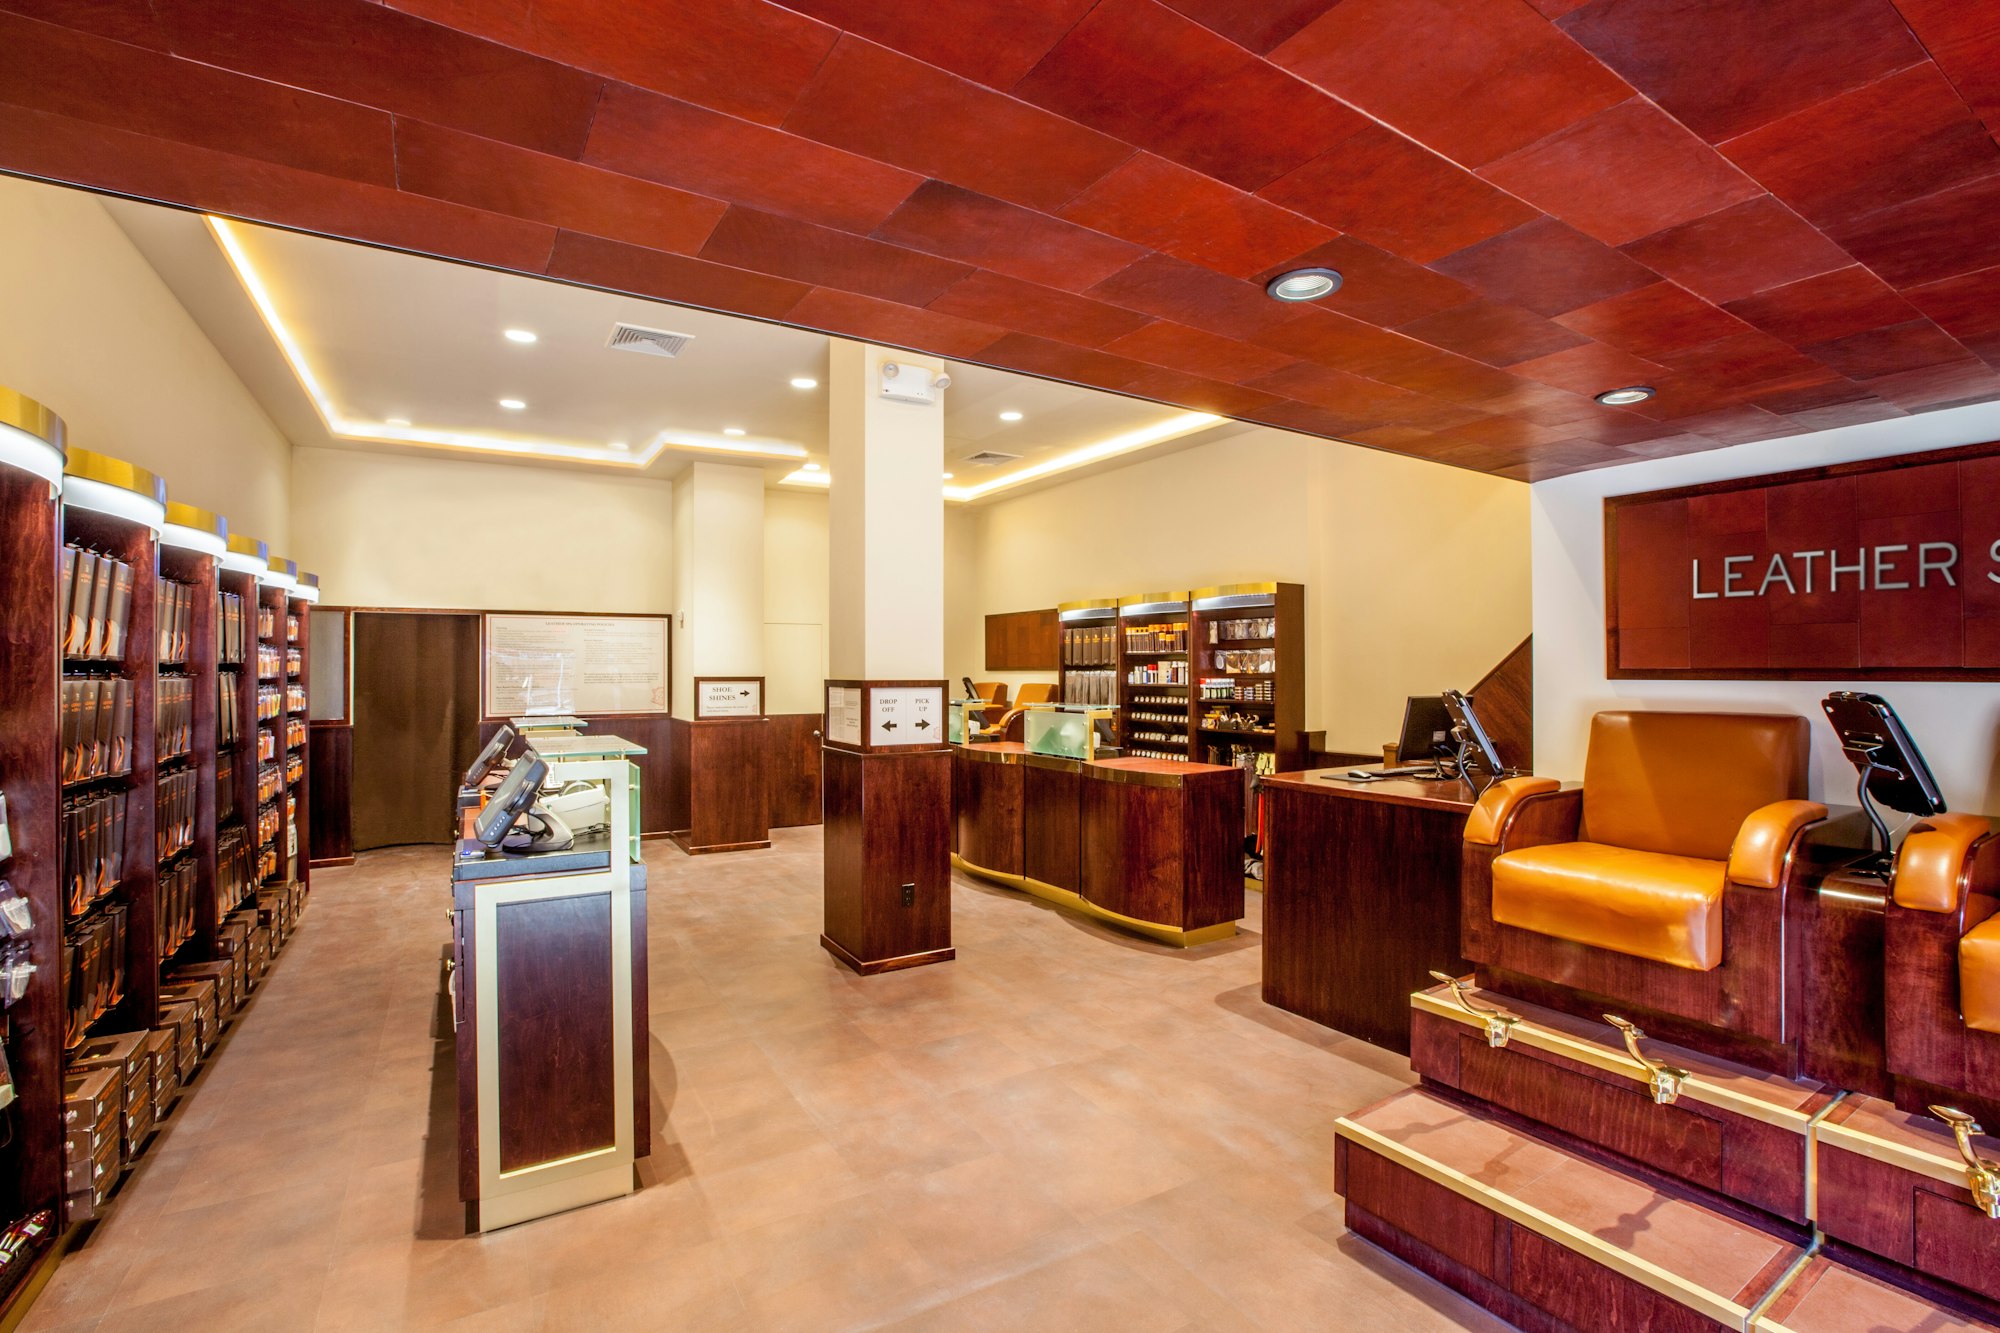 LEATHER SPA - Licensed Stores leather spa grand central